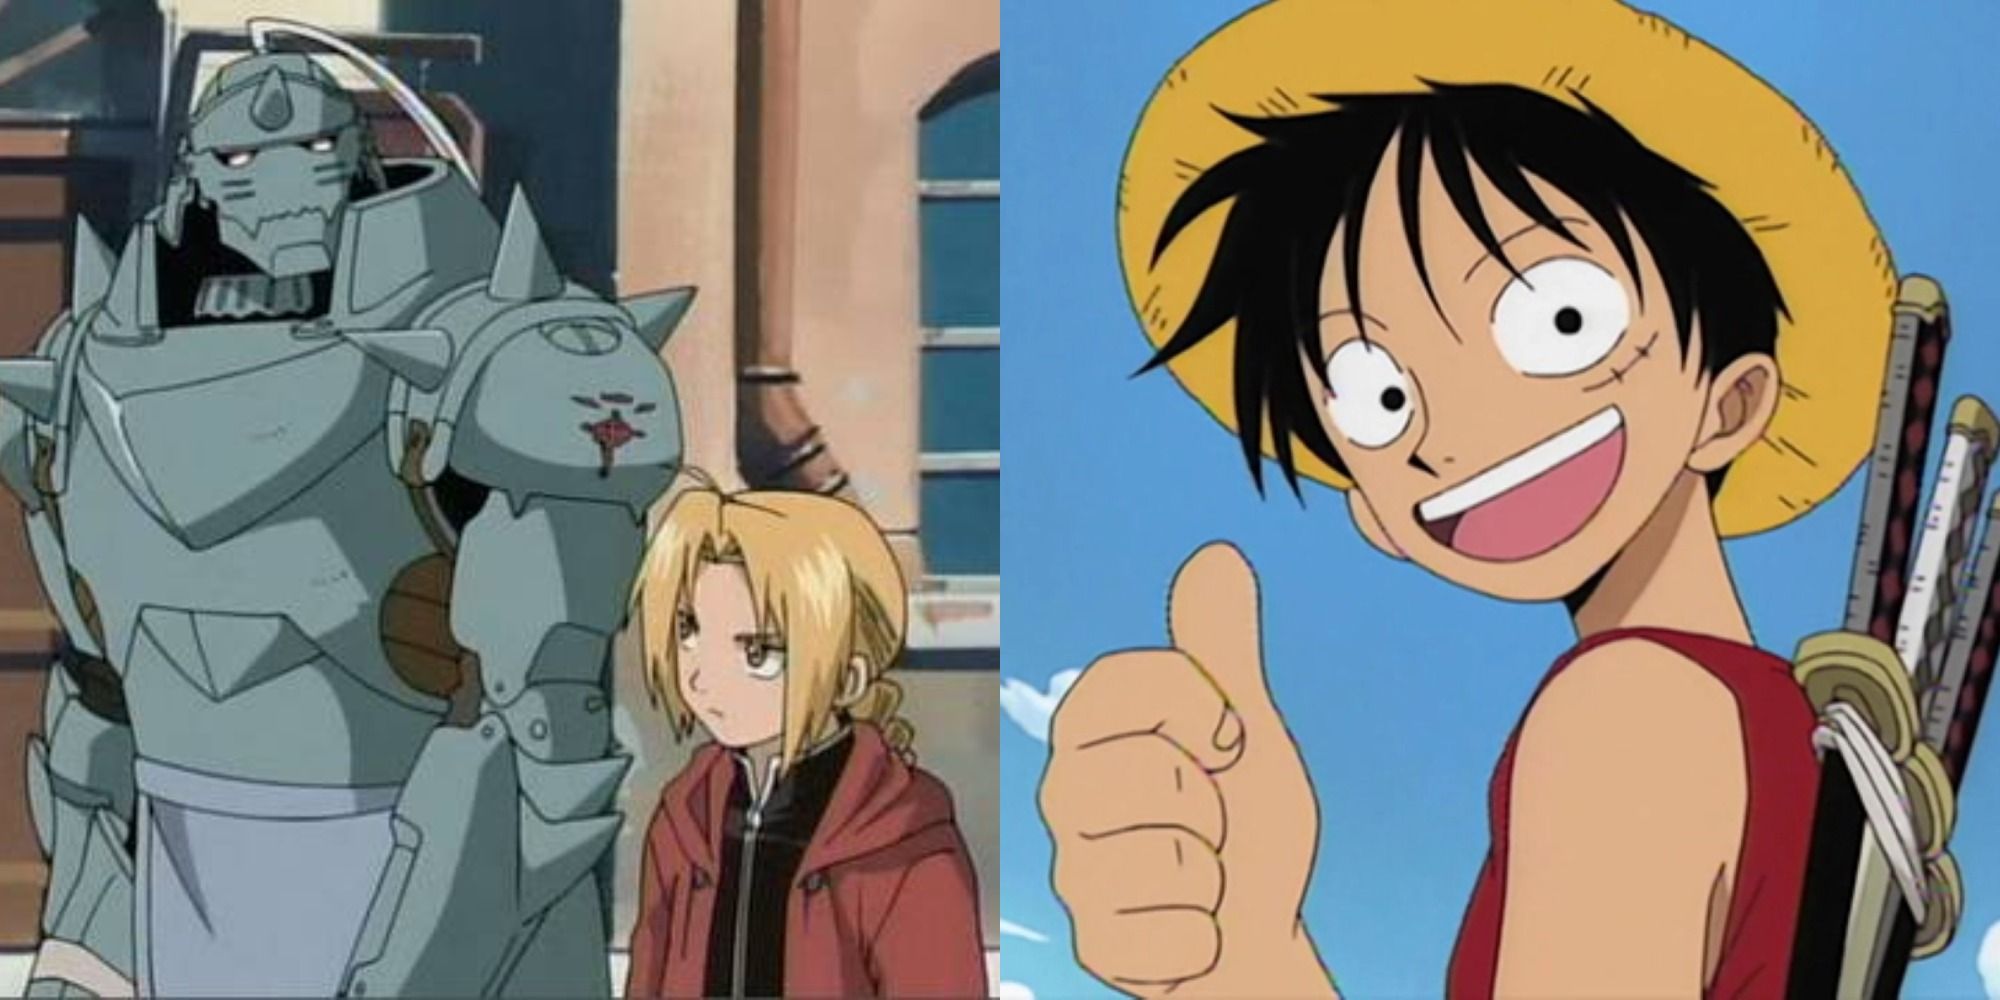 Split image showing Alphonse and Edward in Fullmetal Alchemist and Luffy in One Piece.